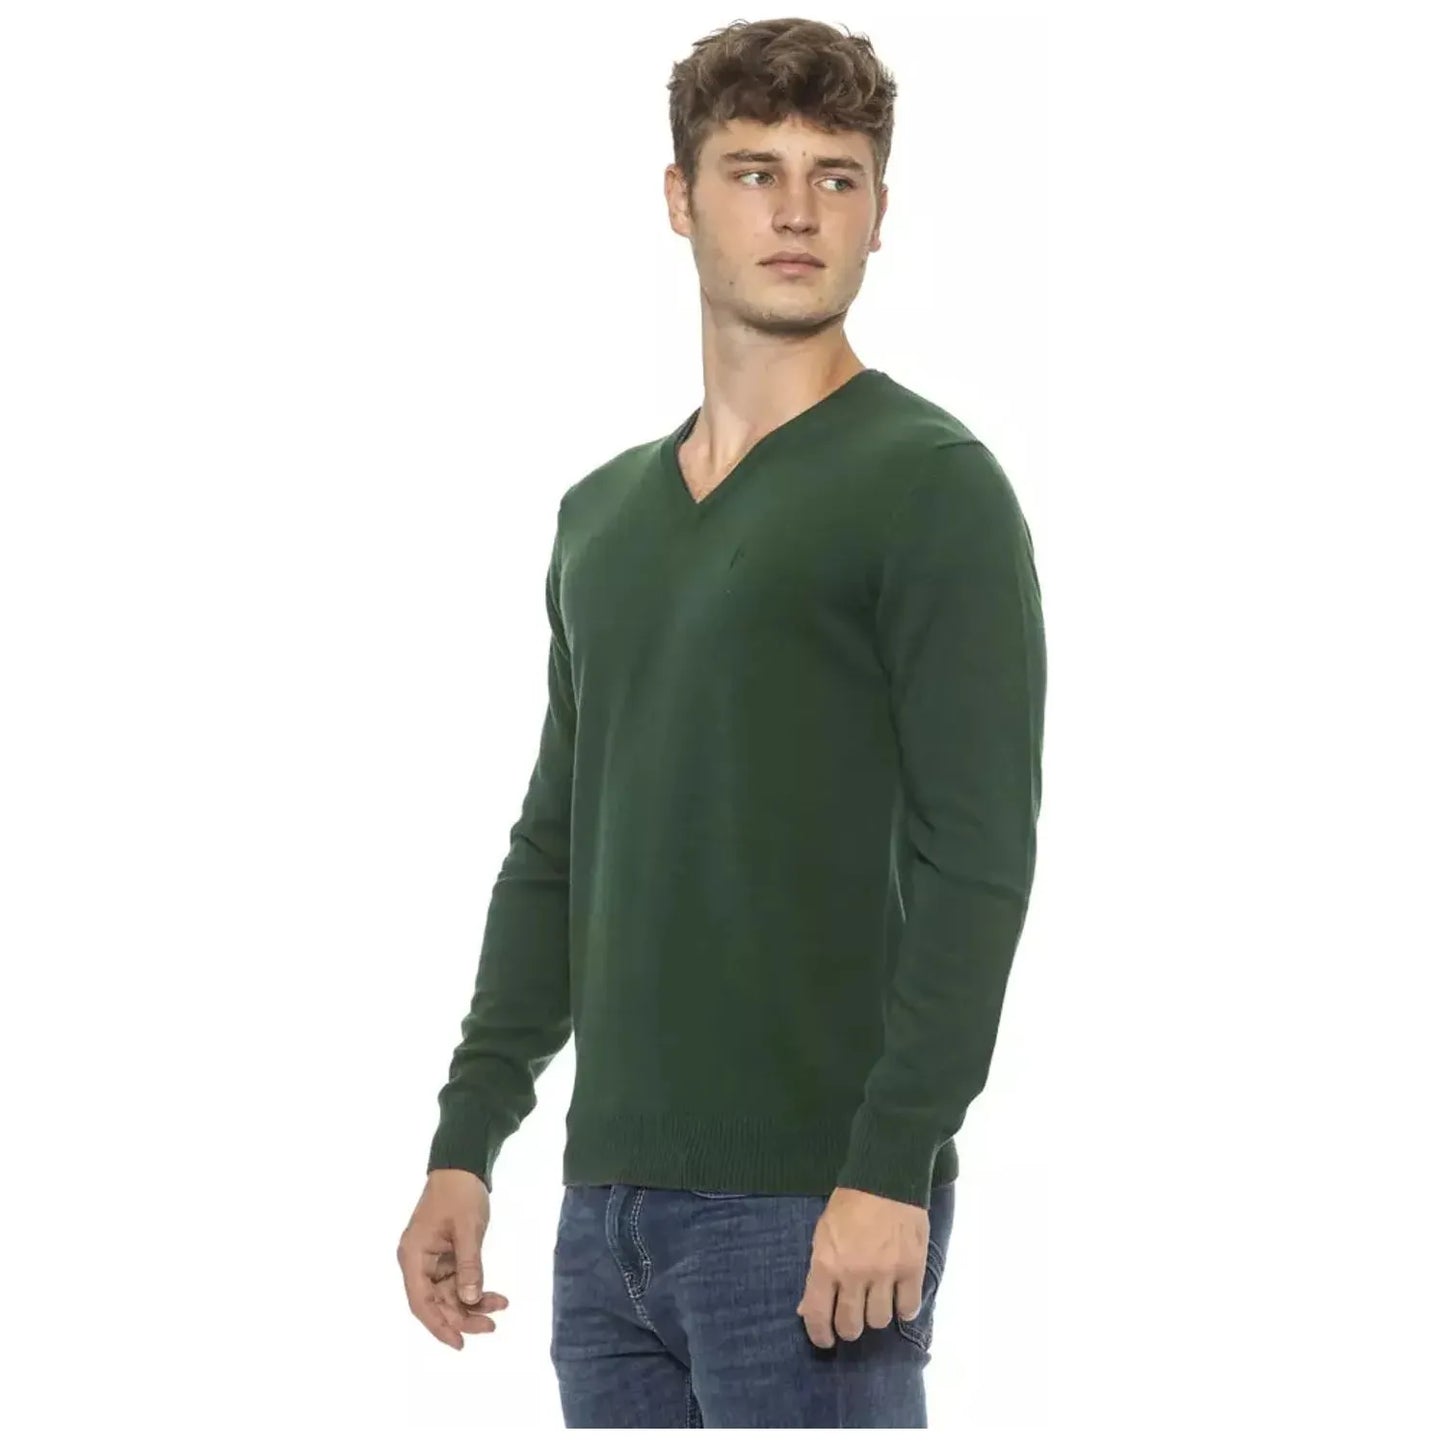 Conte of Florence Elegant Green V-Neck Men's Sweater green-sweater stock_product_image_19451_131700961-20-147d76f8-6c9.webp